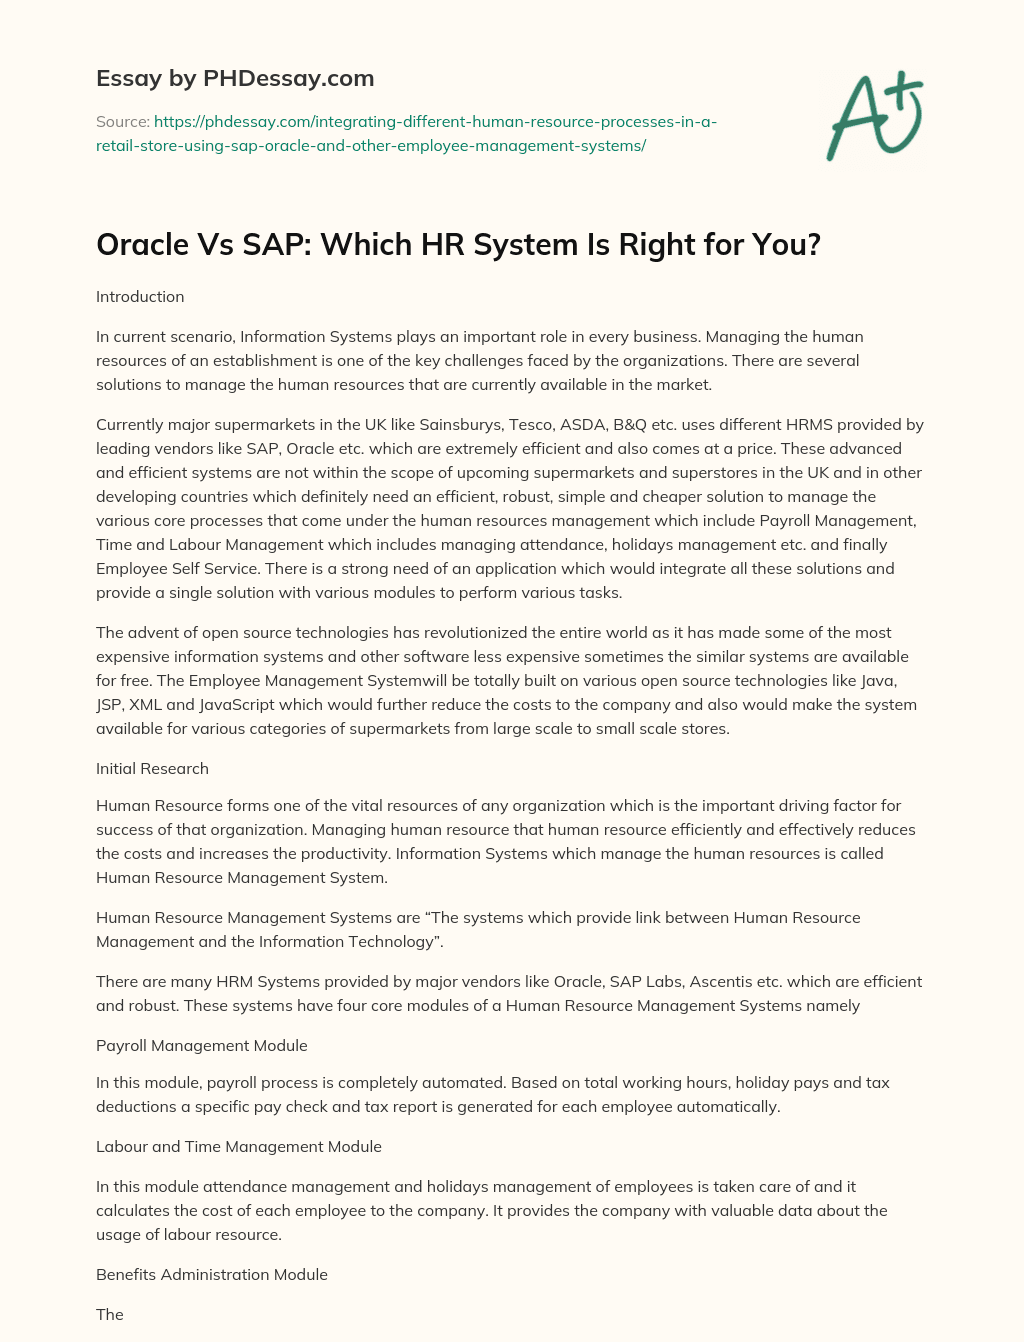 Oracle Vs SAP: Which HR System Is Right for You? essay